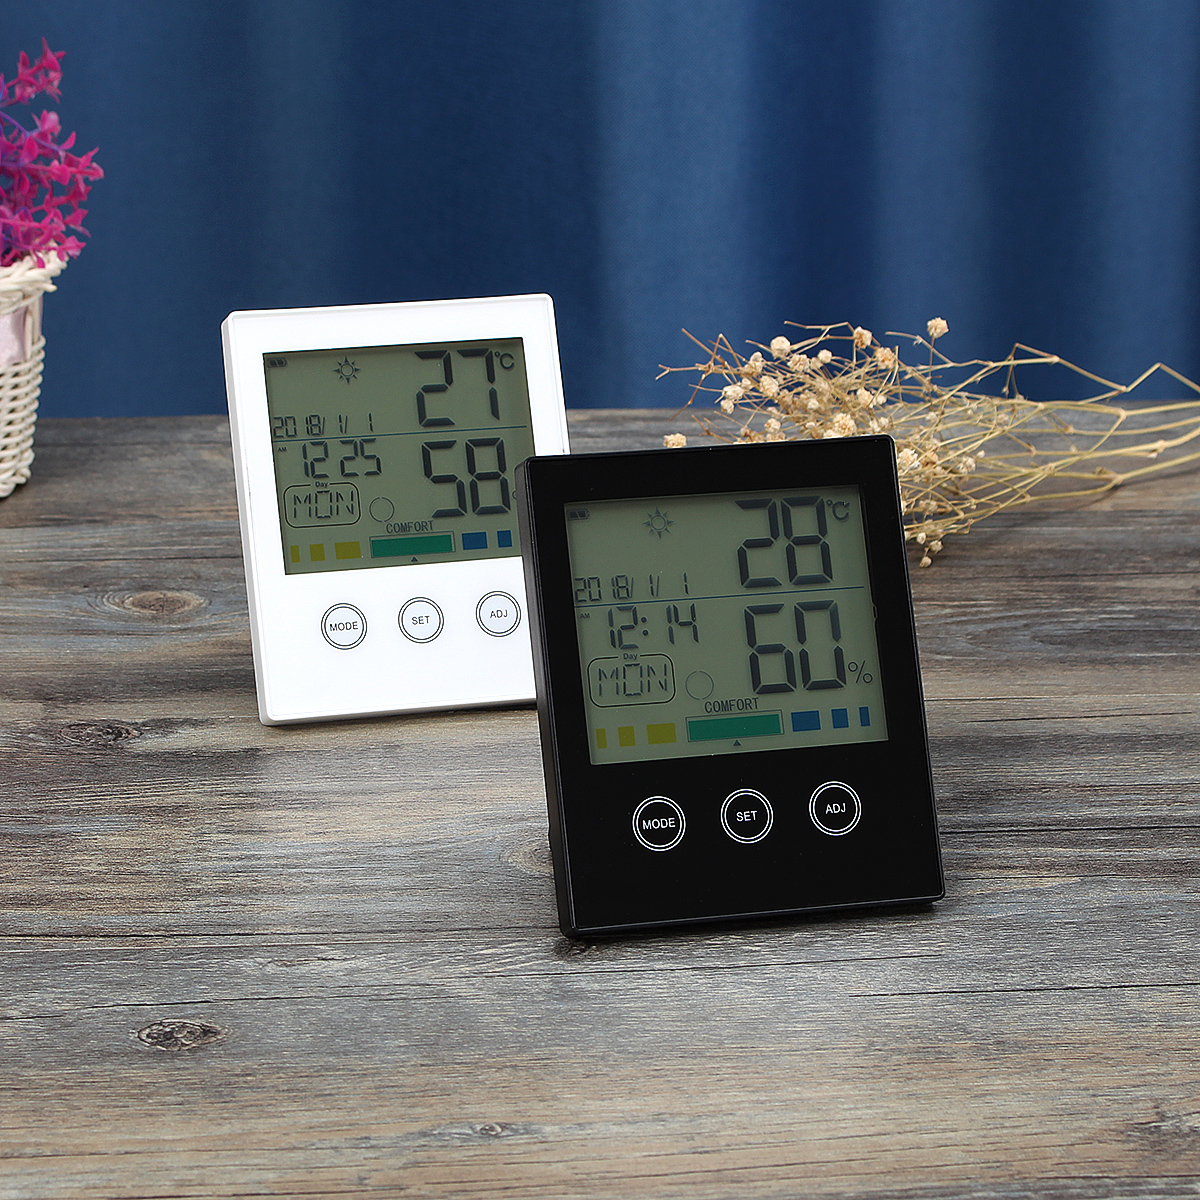 CH-909-Large-LCD-Digital-Thermometer-Hygrometer-Temperature-Humidity-Gauge-Alarm-Clock-Thermometer-1335367-8